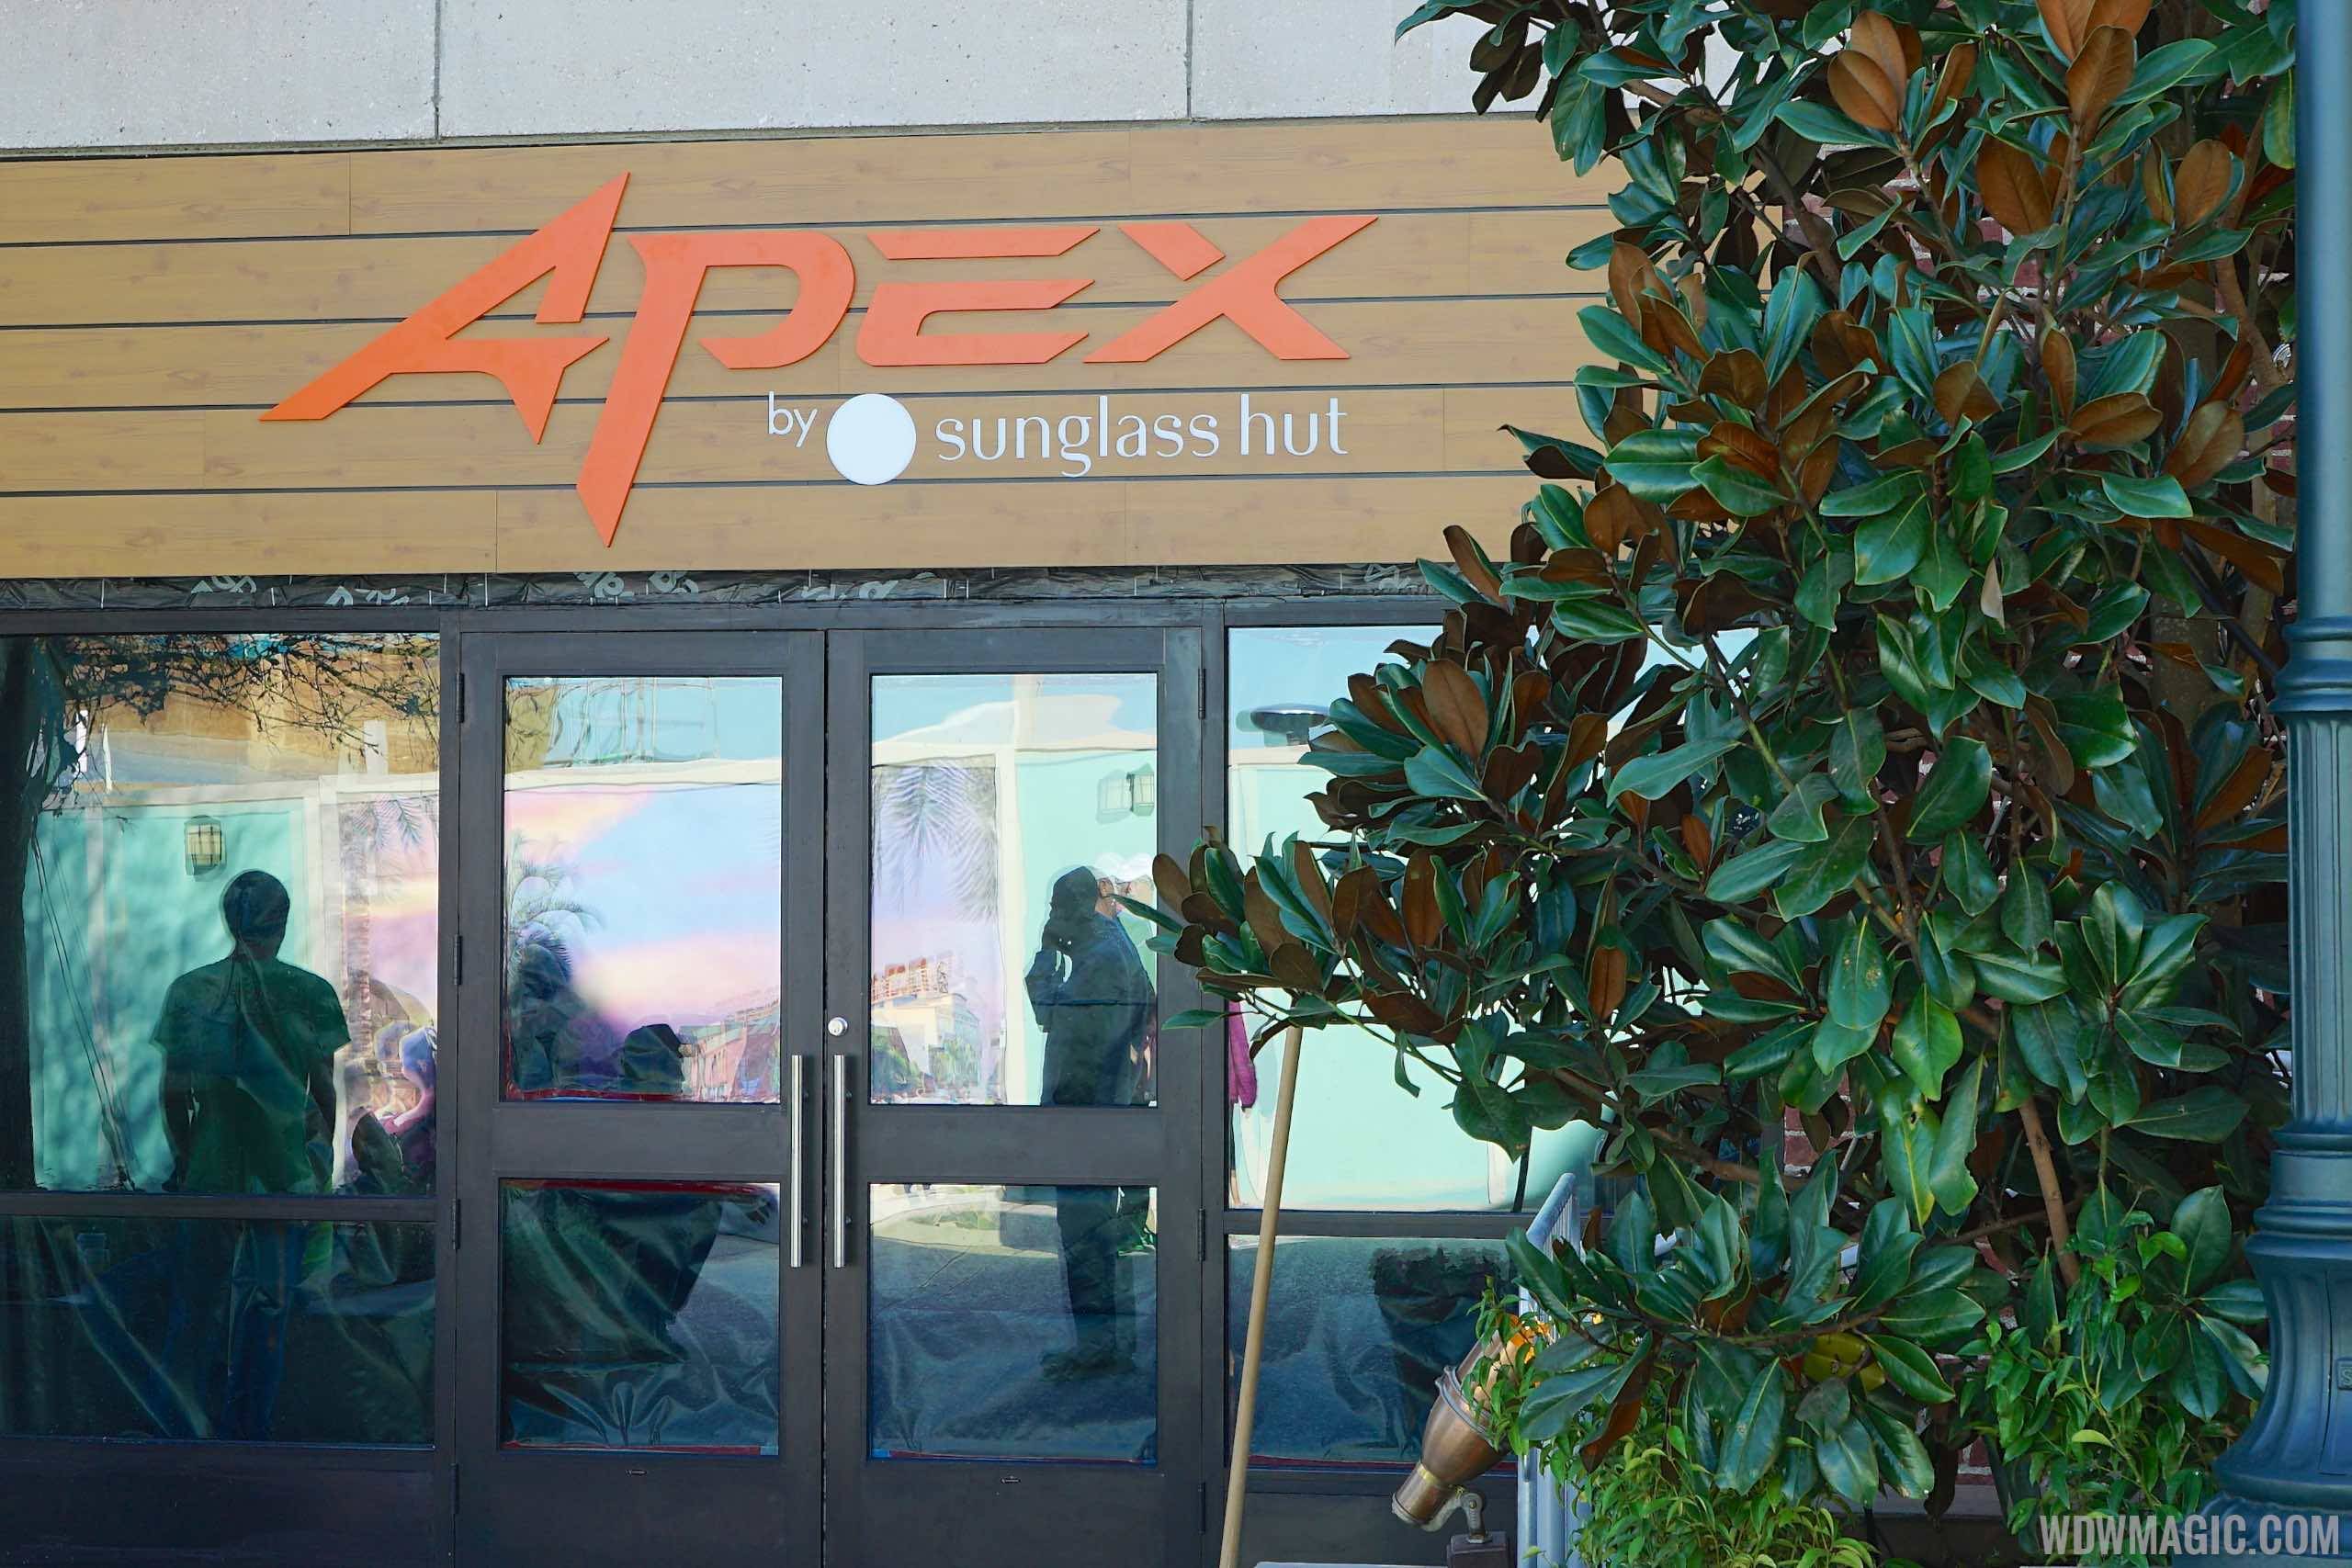 PHOTOS - APEX by Sunglass Hut signage goes up in The Landing at Disney Springs